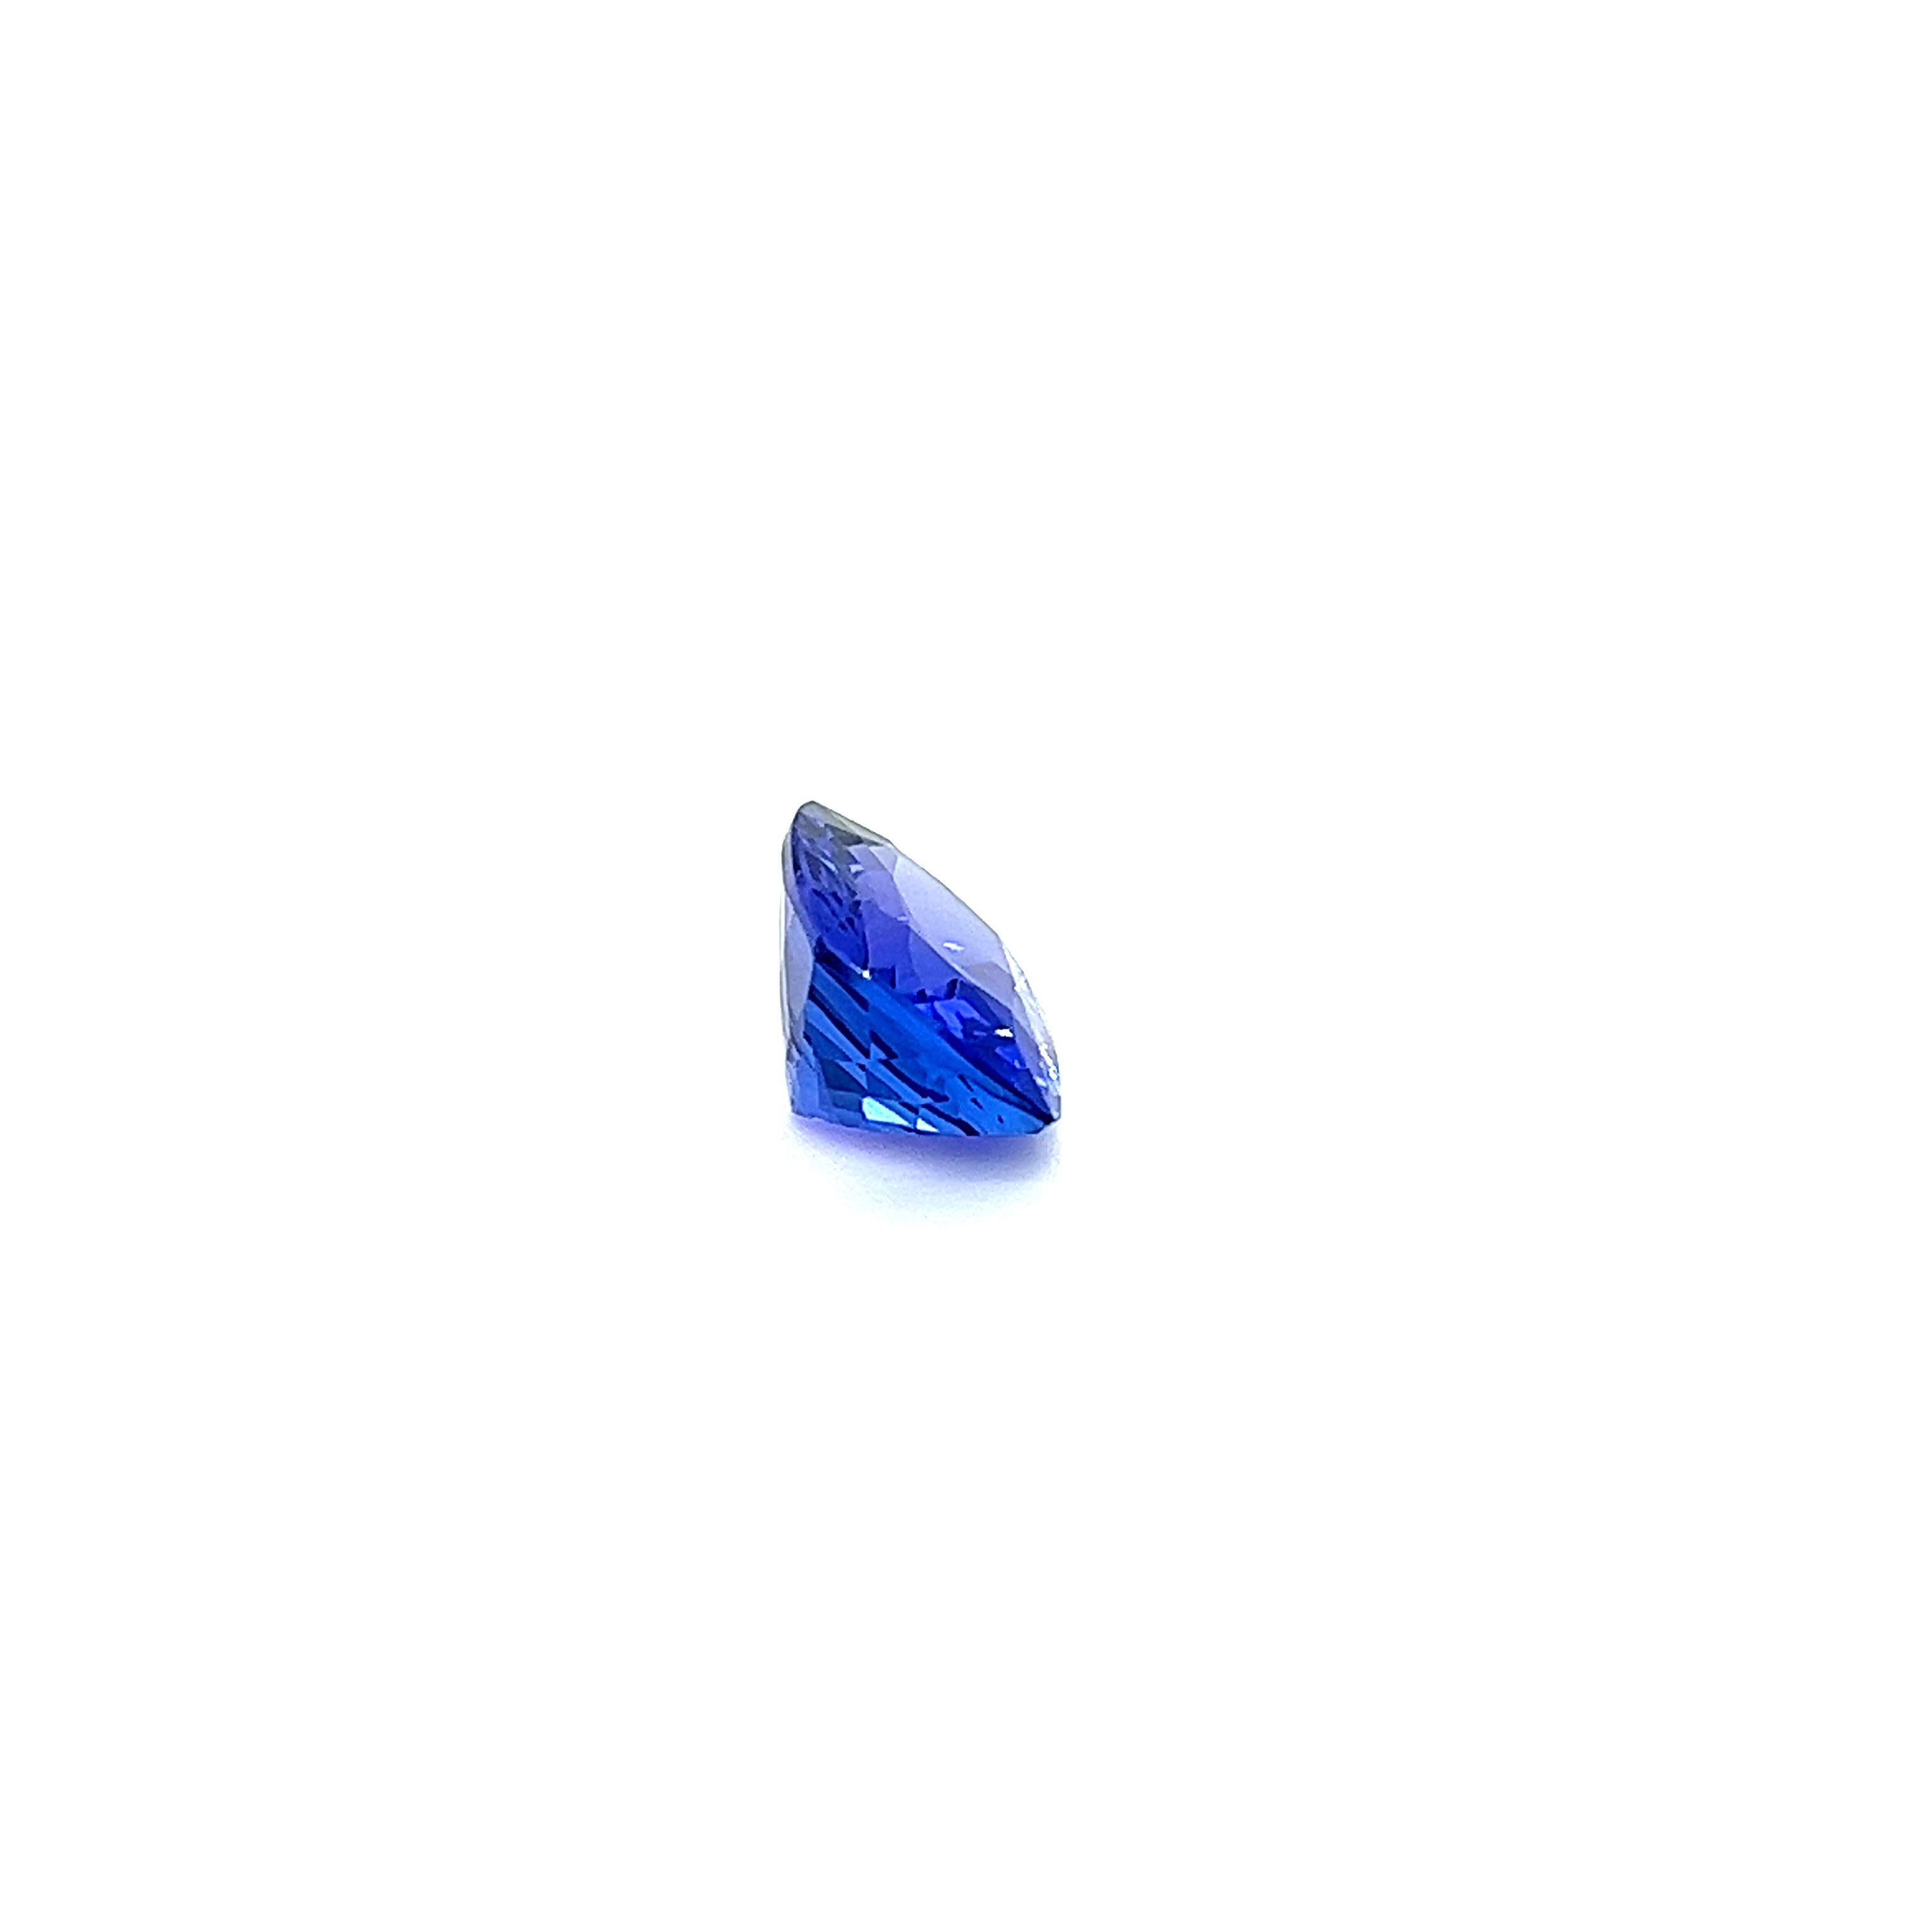 SKU - 
Size - 9x11mm
Shape - cushion
Grade - SDLX
Weight - 3.12
Price - $348

SDLX Tanzanite is one of the rarest gemstones in the world. Get this beautiful gem to grace your collection with charm and shine. Tanzanite displays intense colour play.